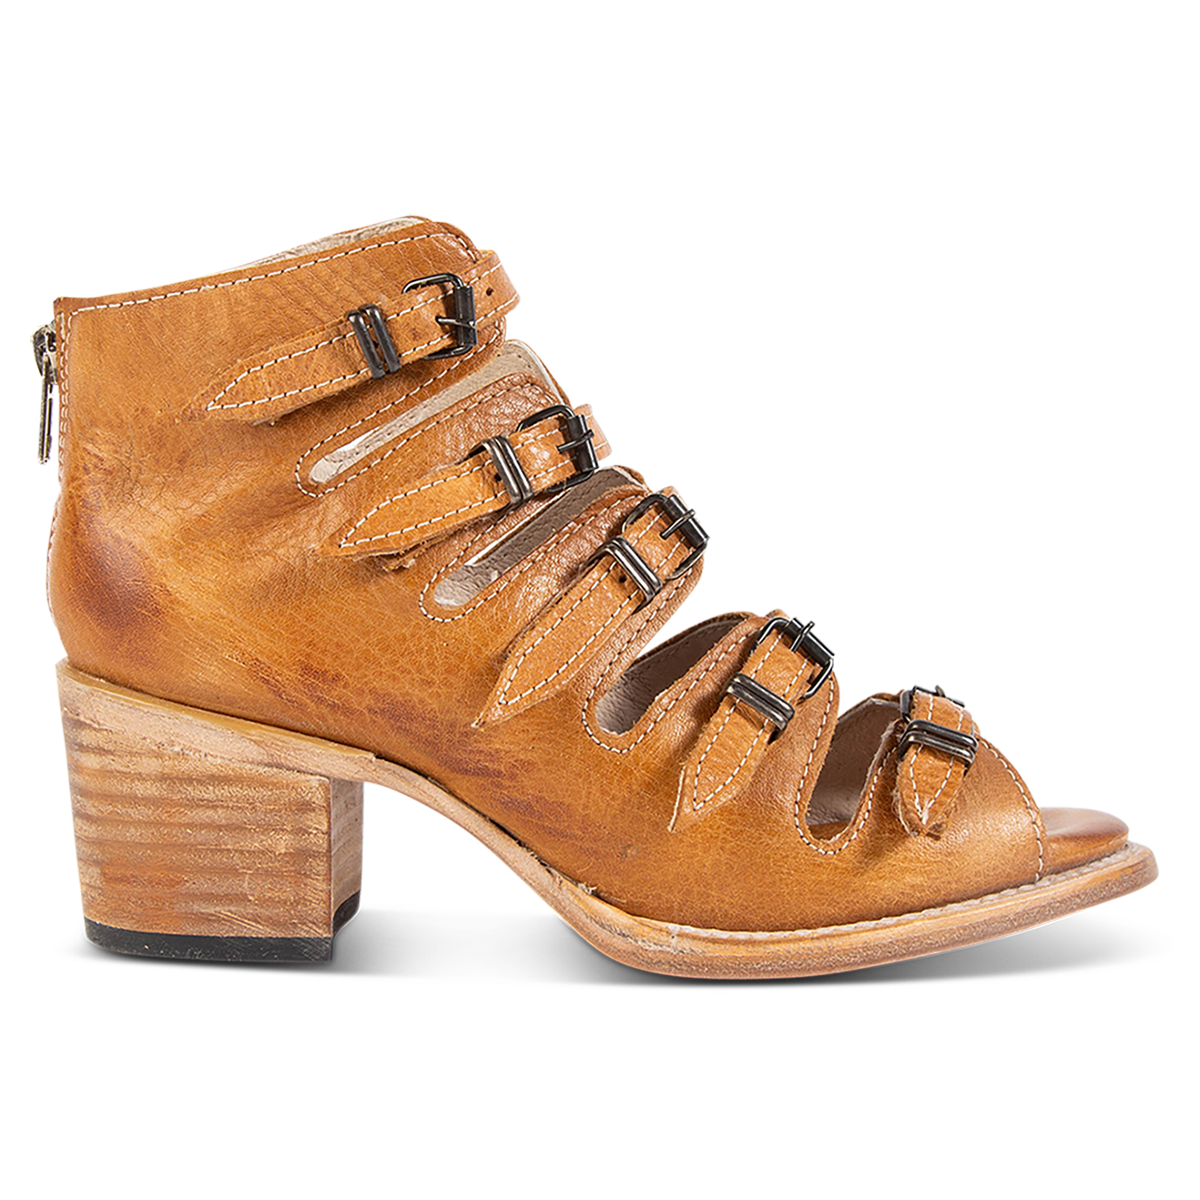 FREEBIRD women's Quinn wheat sandal with straps, metal buckles and mid-heel